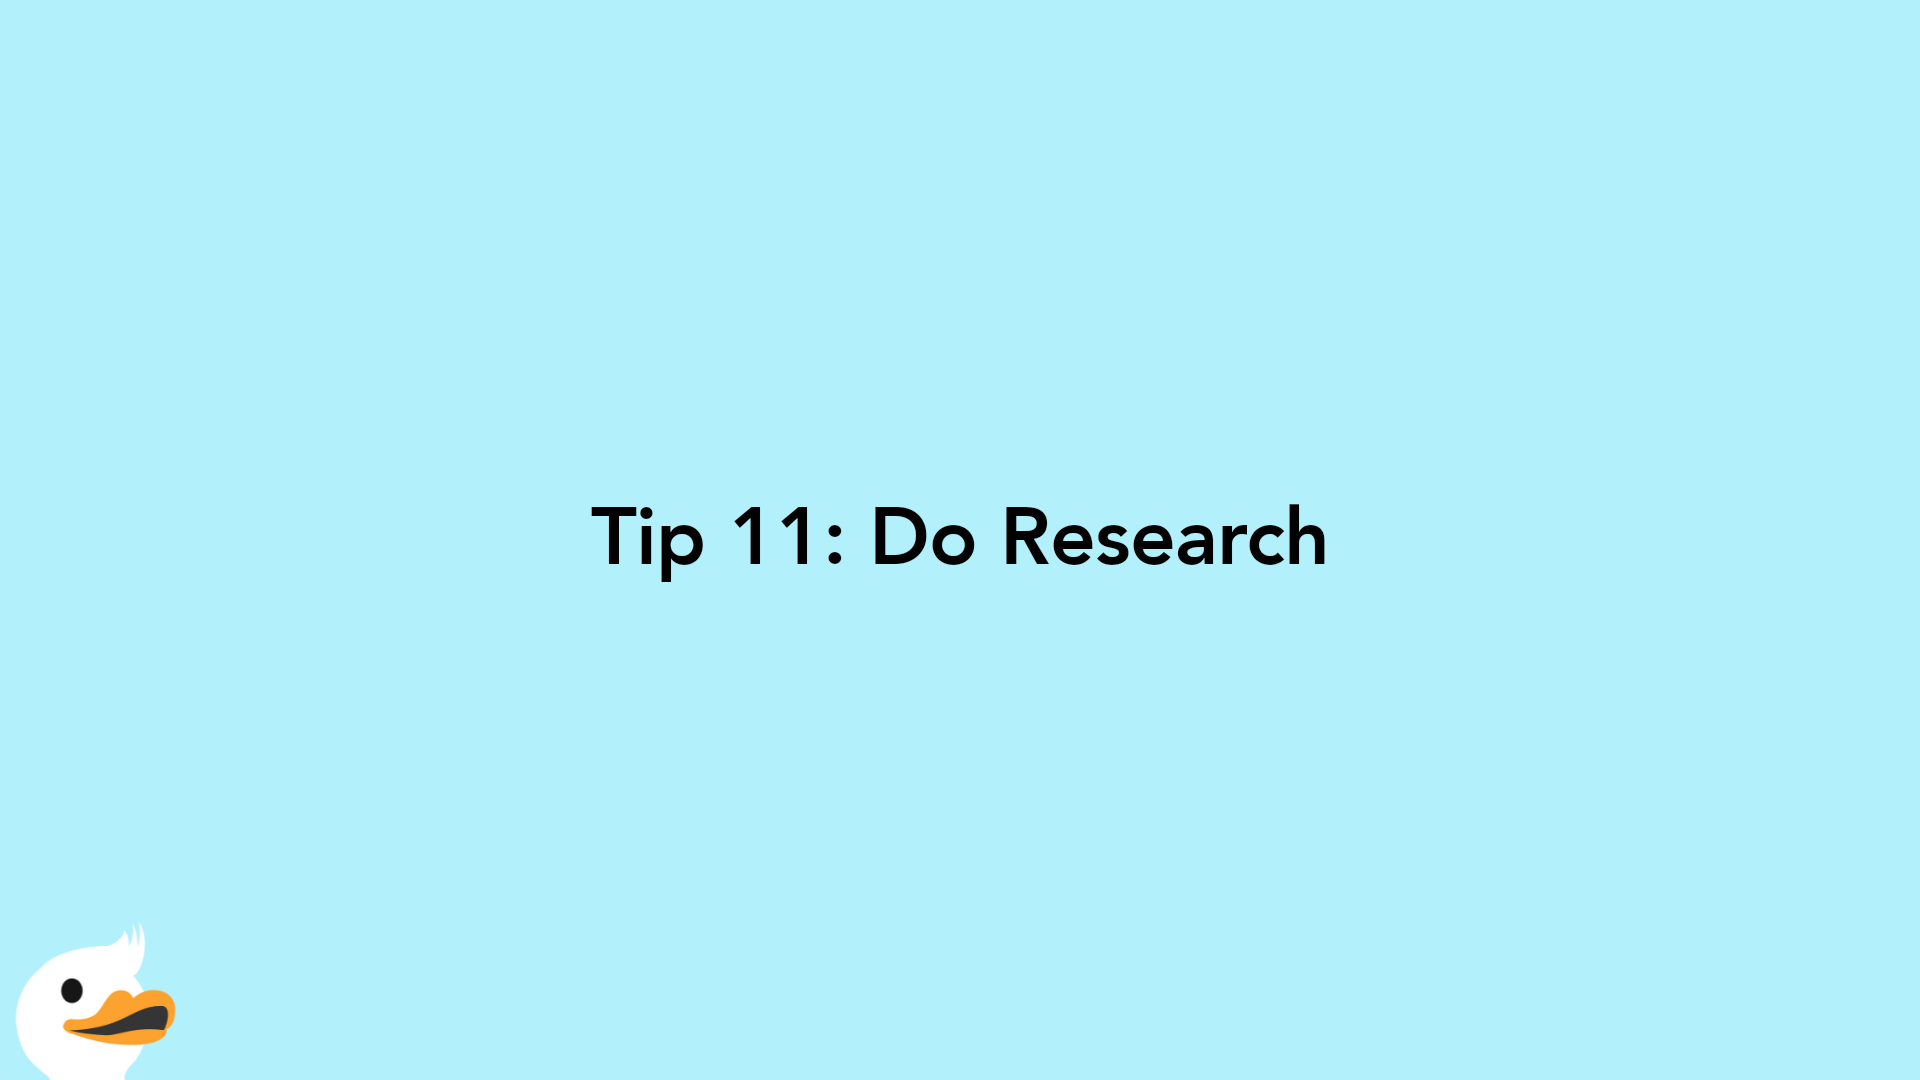 Tip 11: Do Research